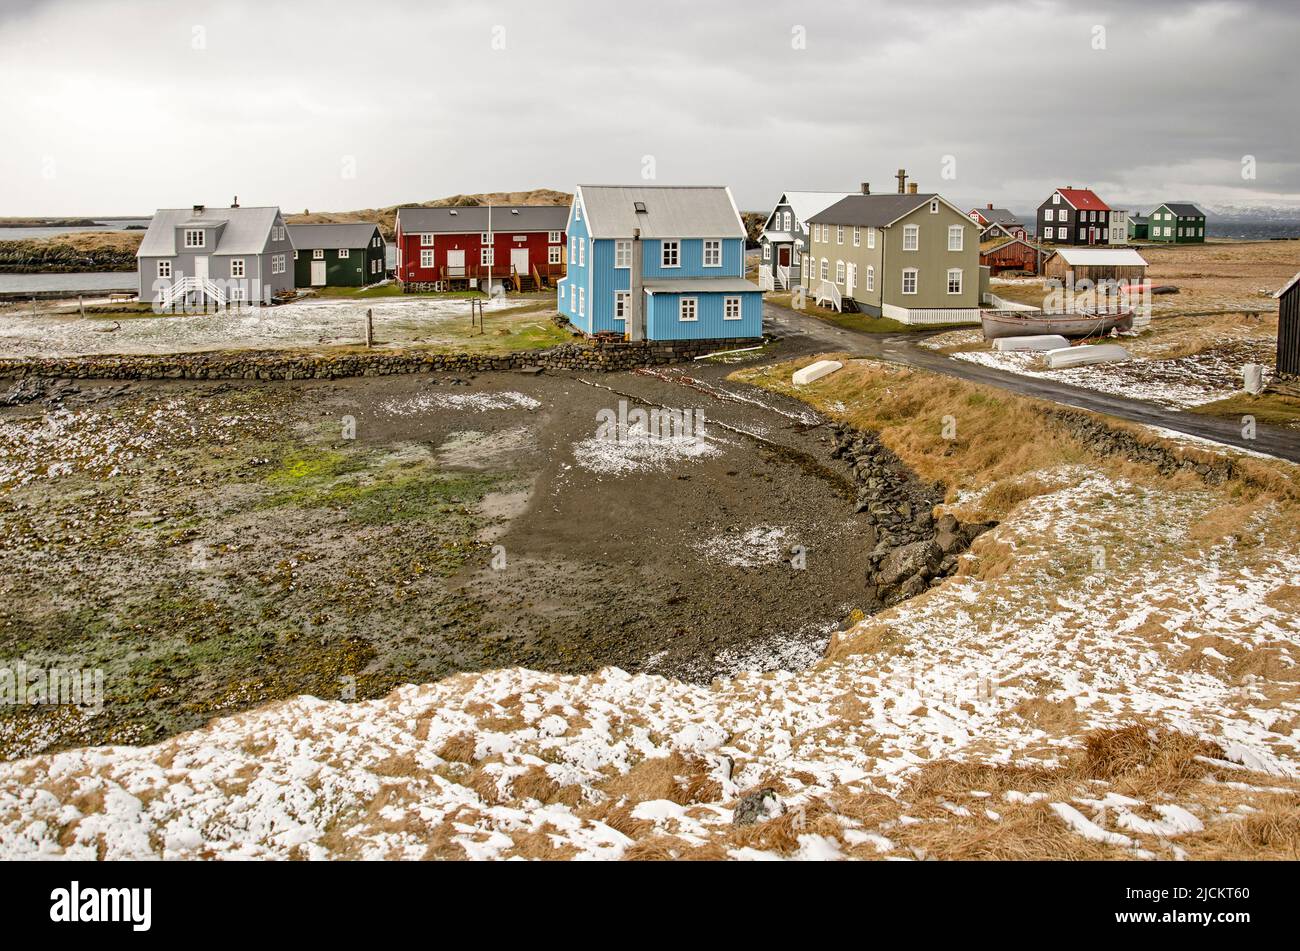 Flatey, Iceland, May 5, 2022: view across a tiny bay towards the village with its colorful houses Stock Photo